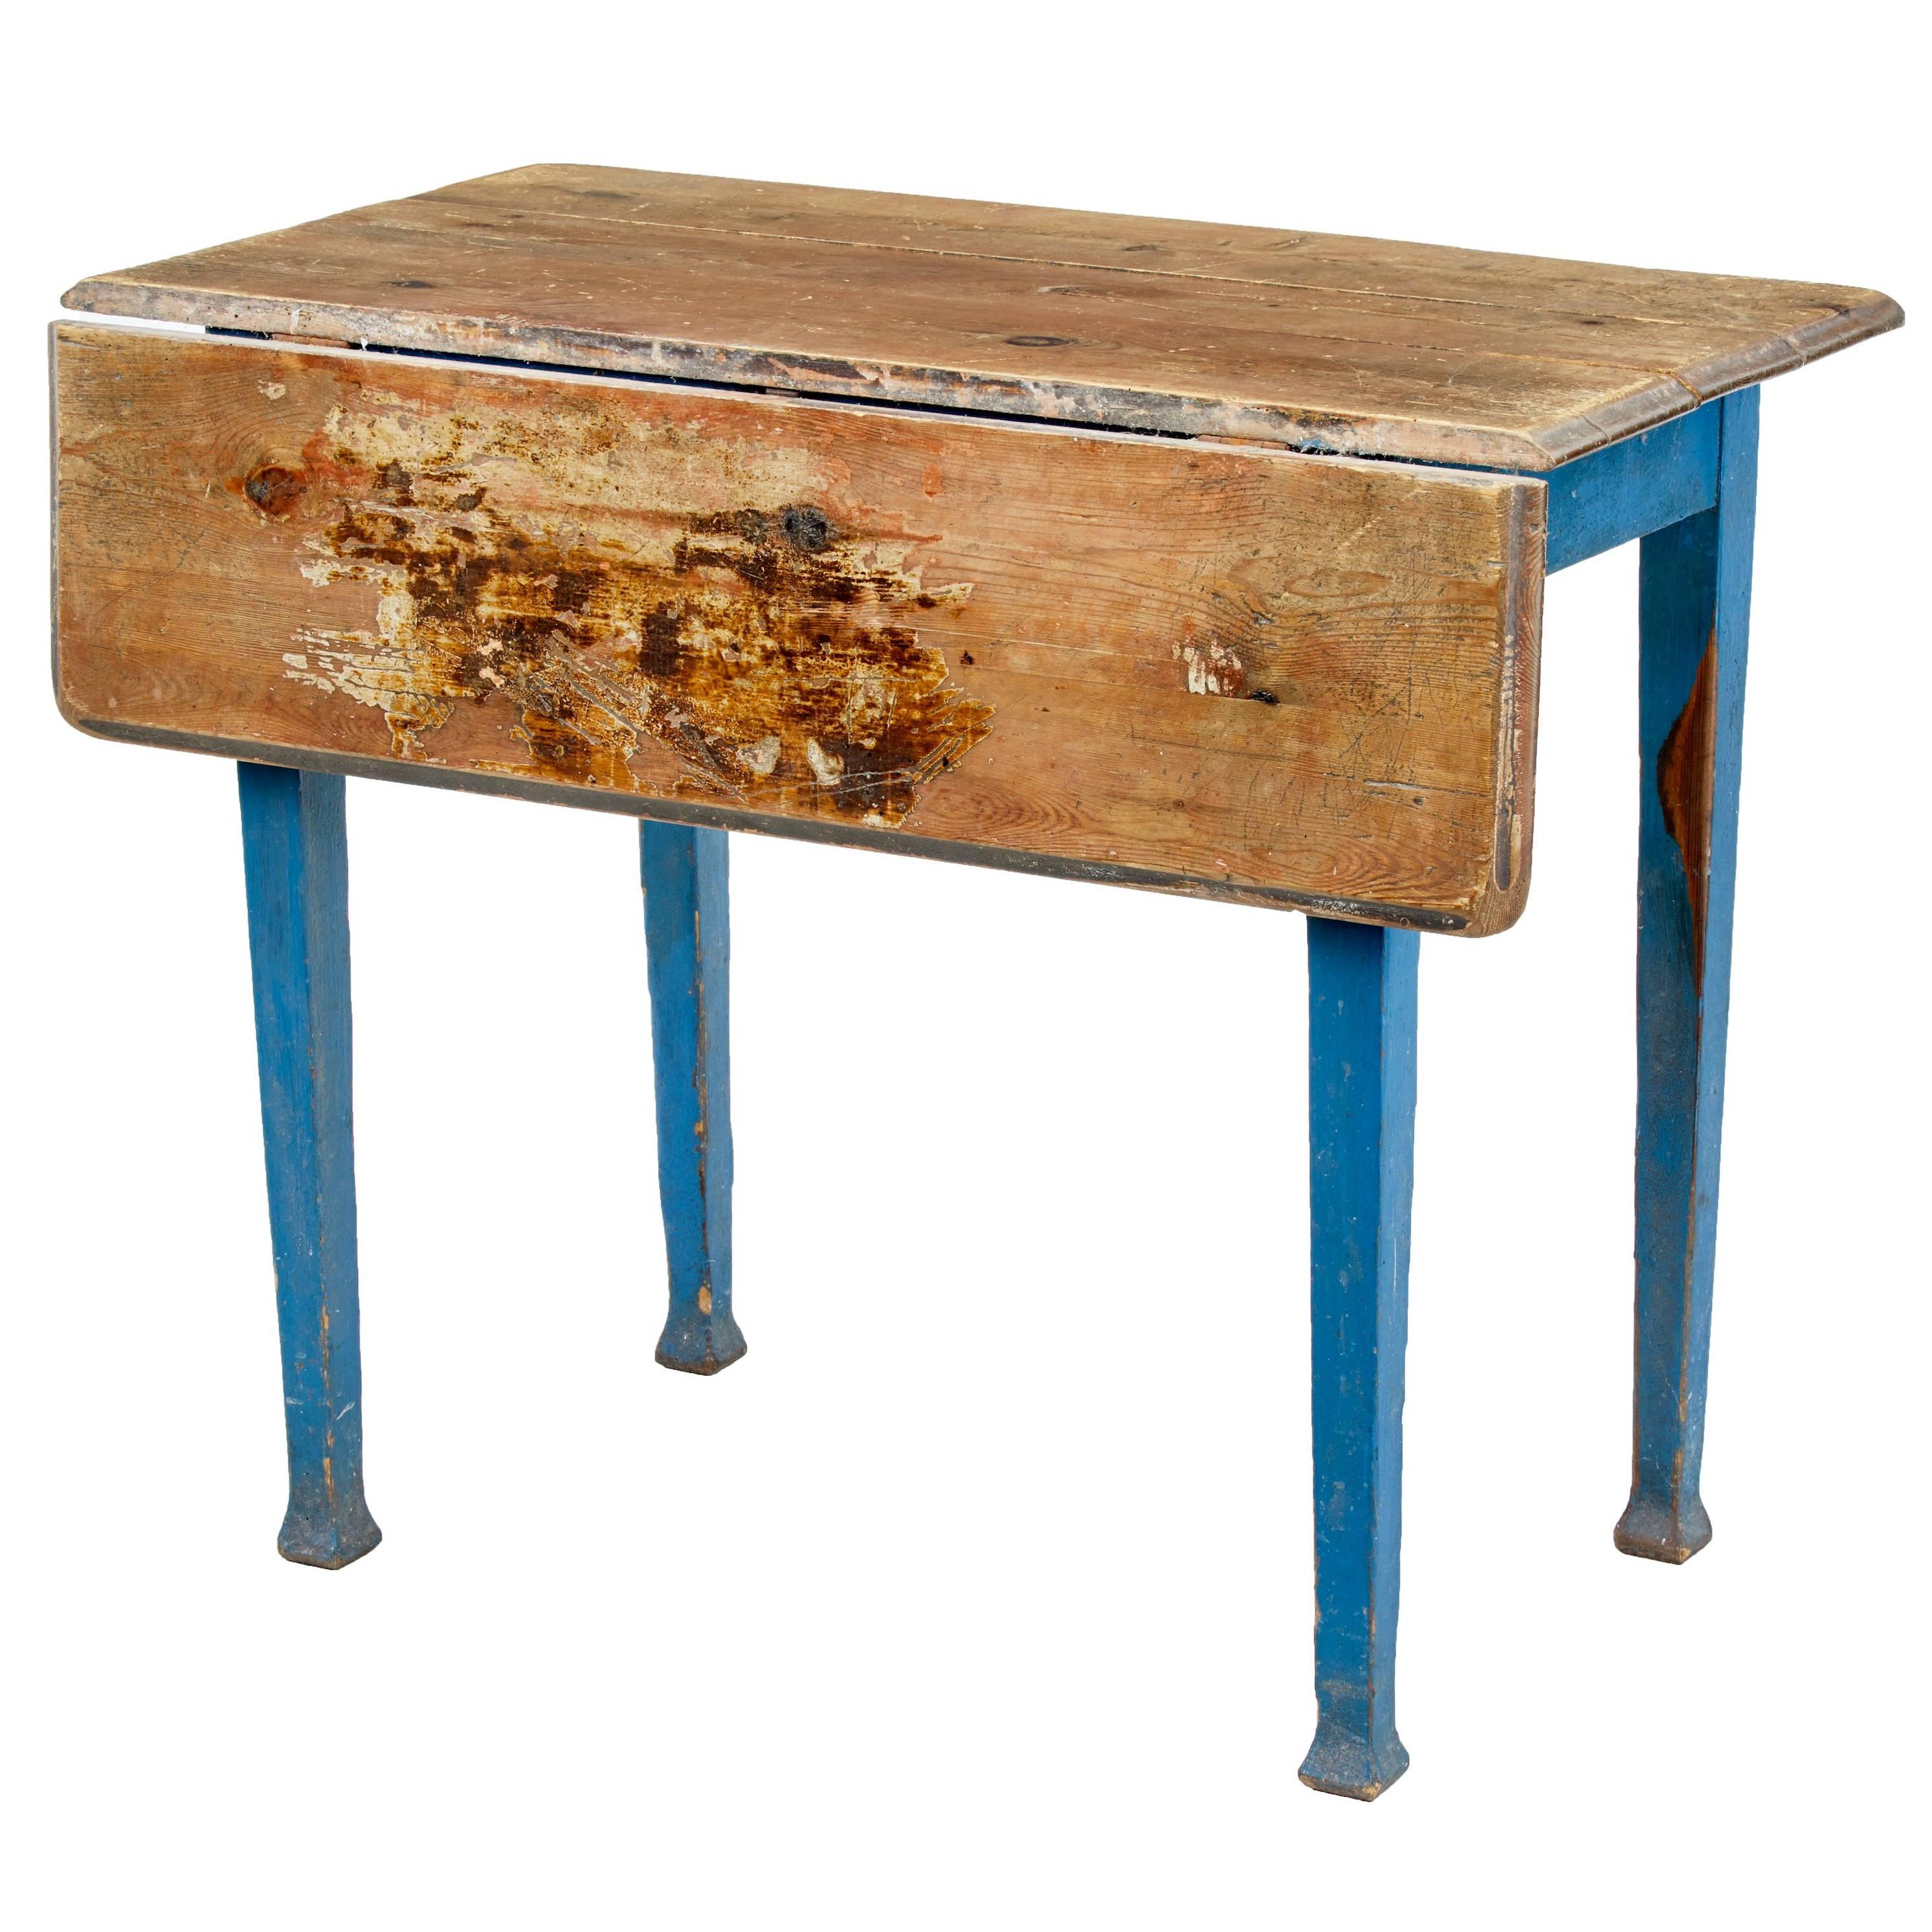 19th Century Swedish Painted Pine Drop-Leaf Kitchen Table